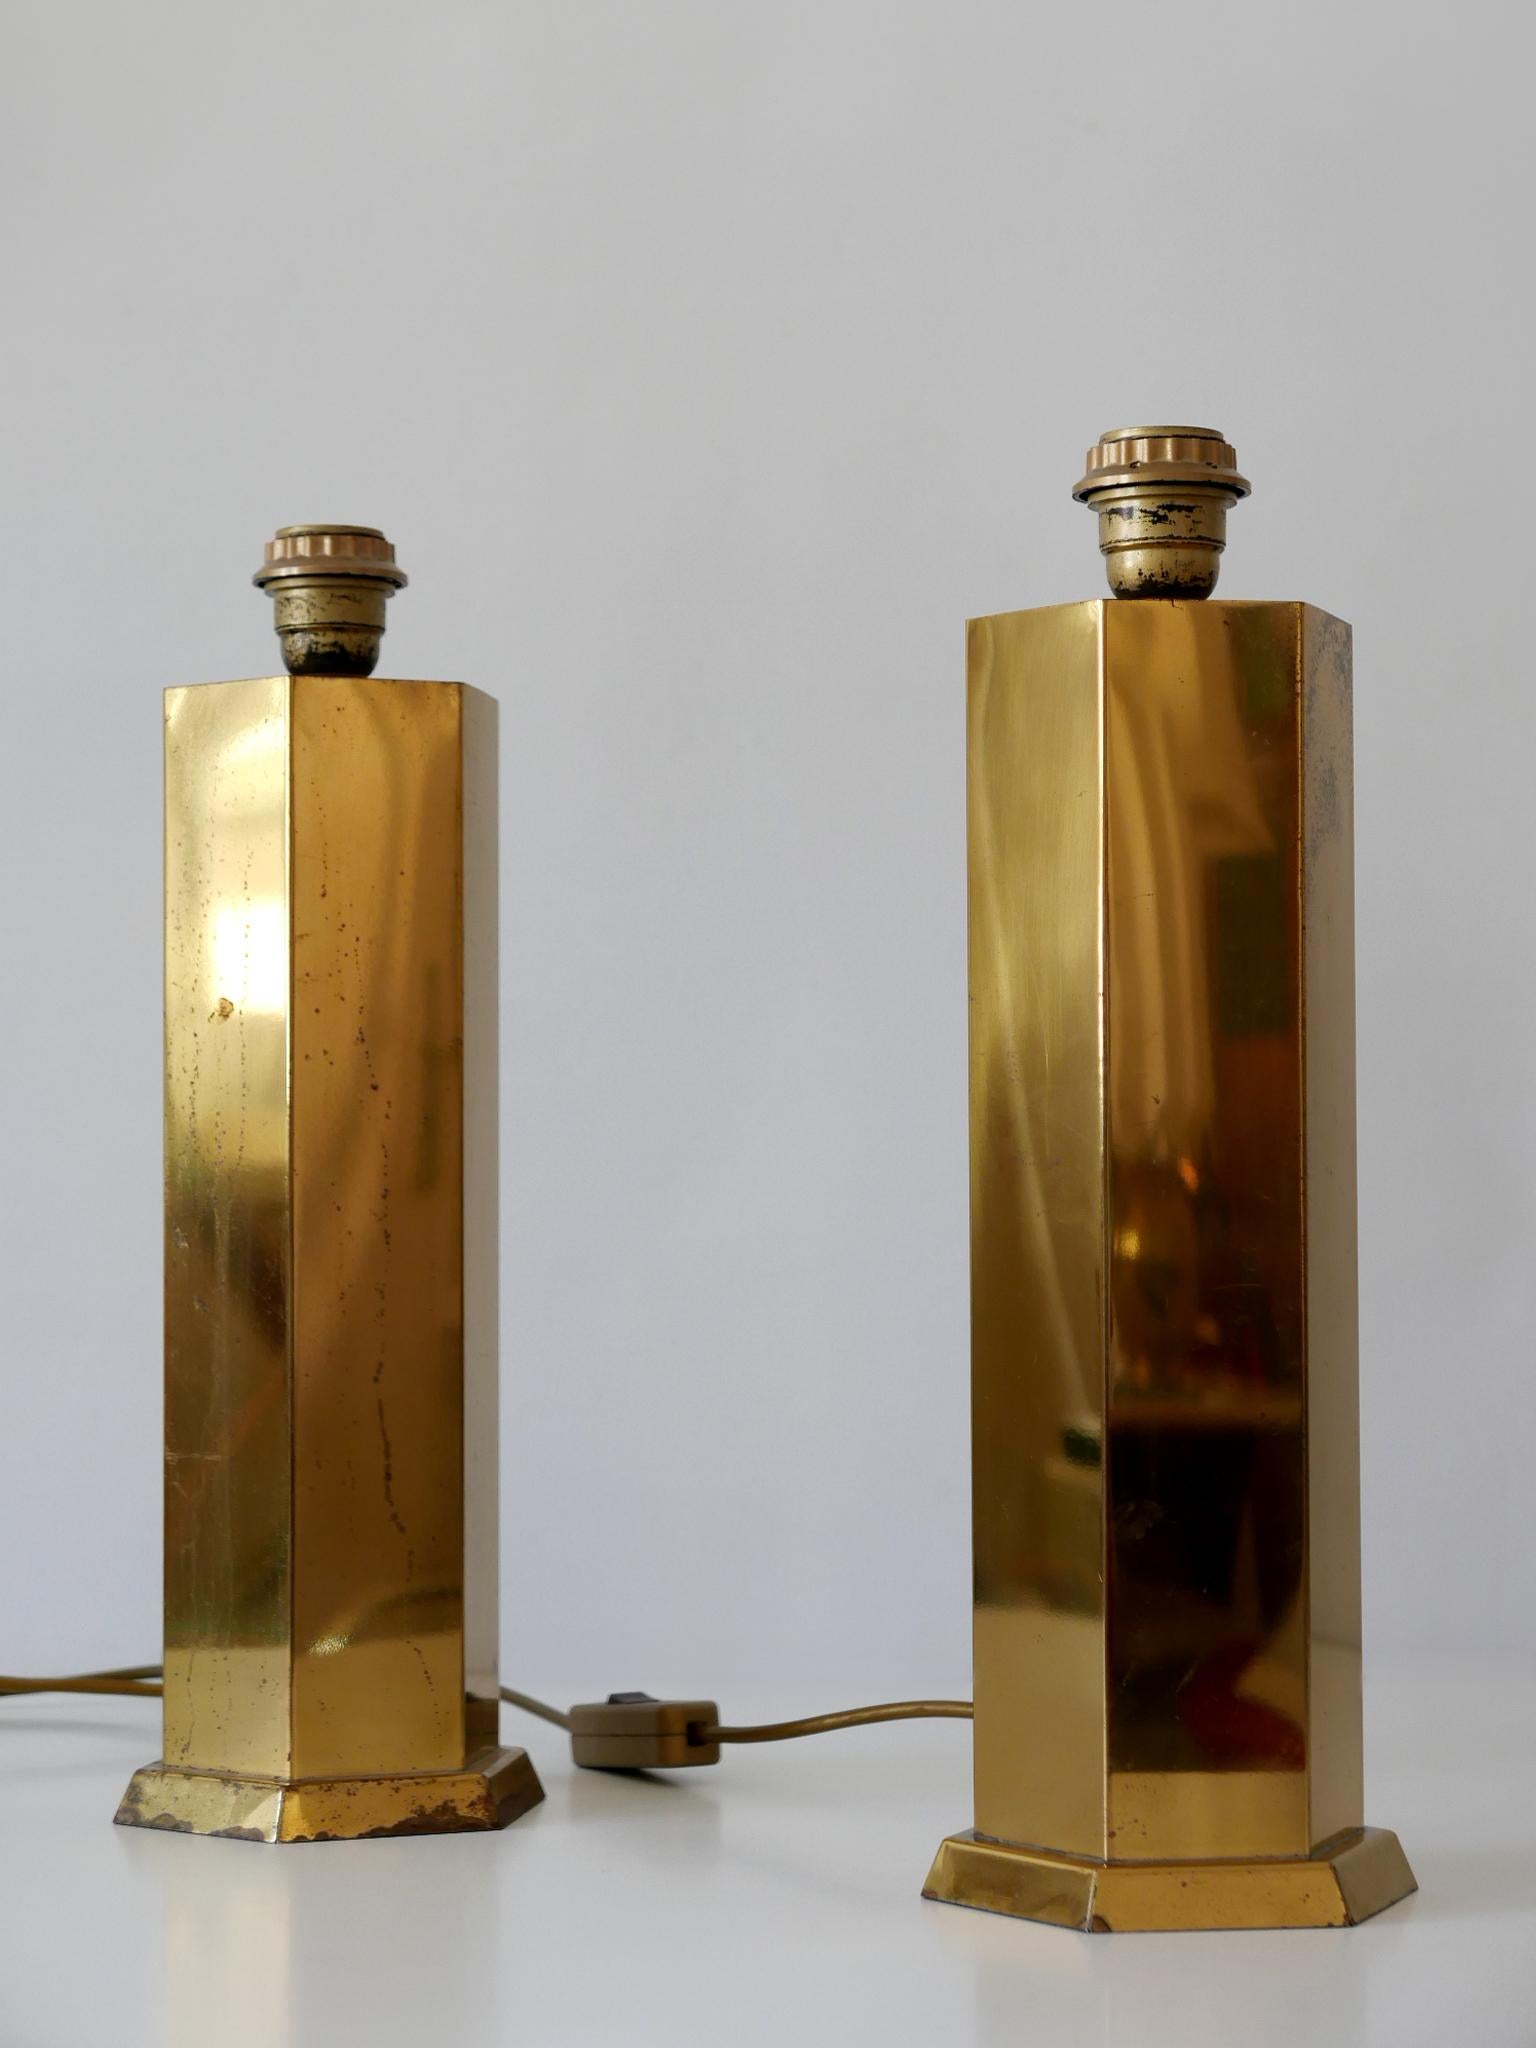 Set of two rare Mid-Century Modern brass table lamps. Designed and manufactured in Germany, 1950s.

Executed in brass, each lamp comes with an E27 / E26 Edison screw fit bulb socket, is in working condition and runs both on 110 and 230